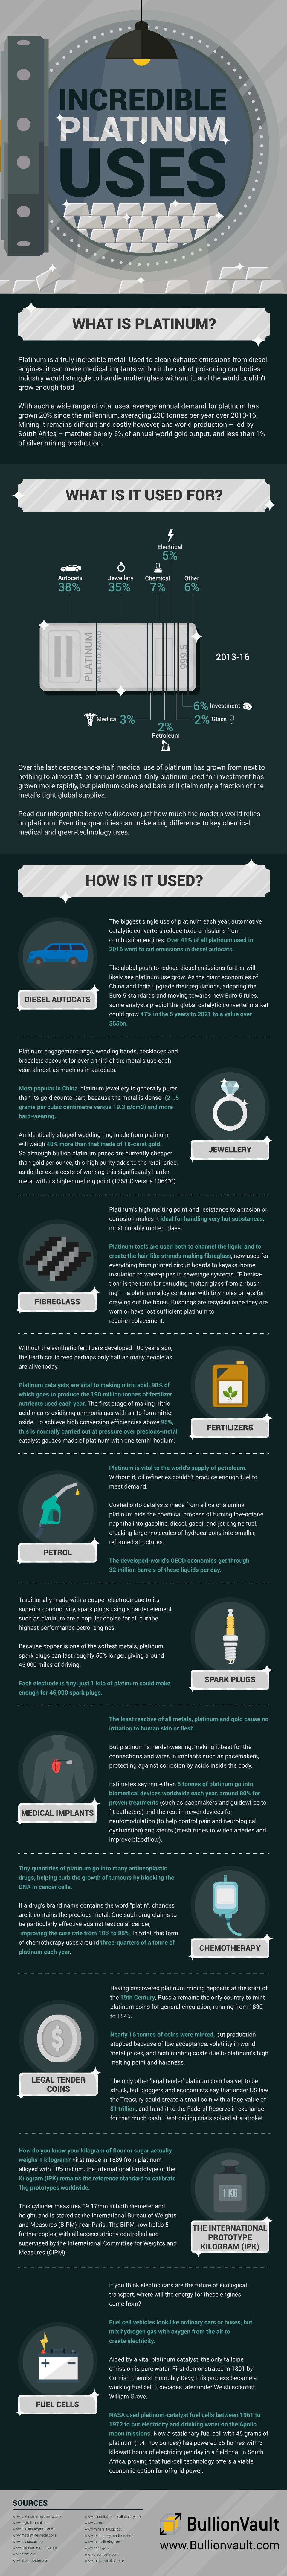 Incredible uses of platinum infographic